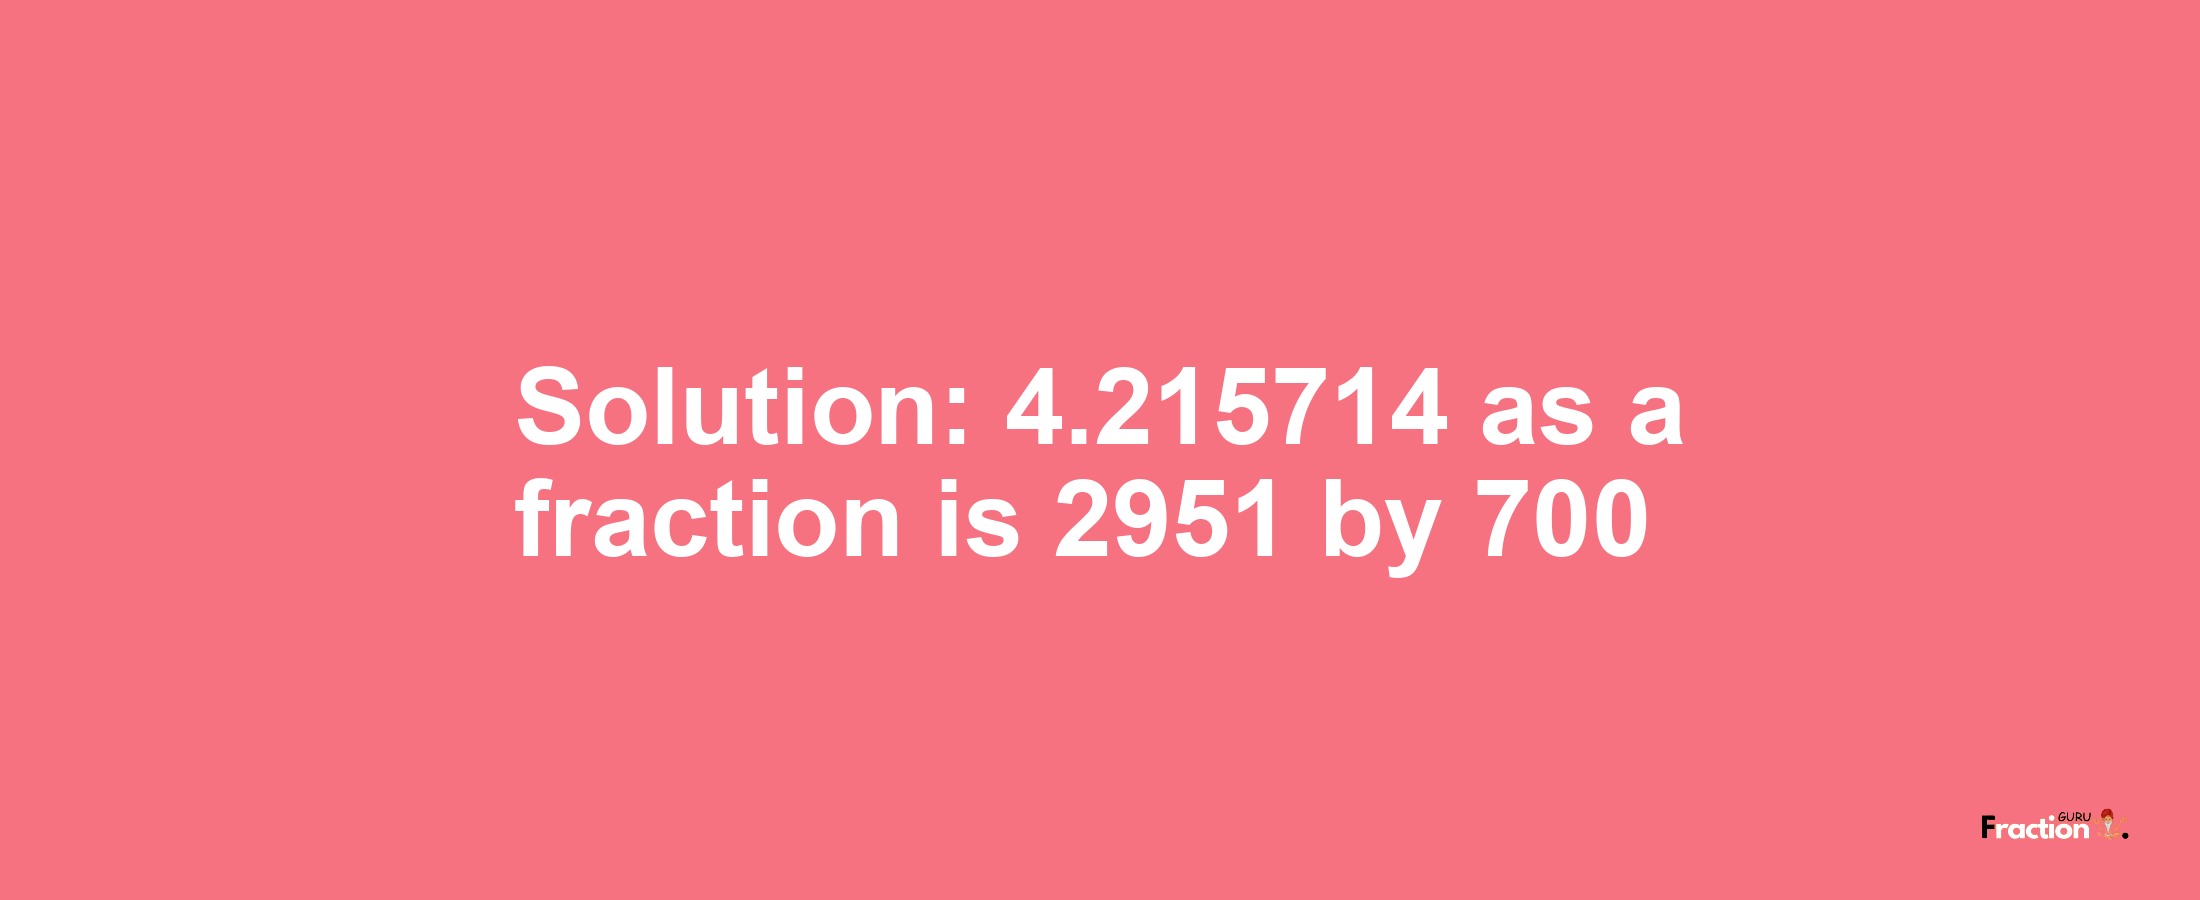 Solution:4.215714 as a fraction is 2951/700